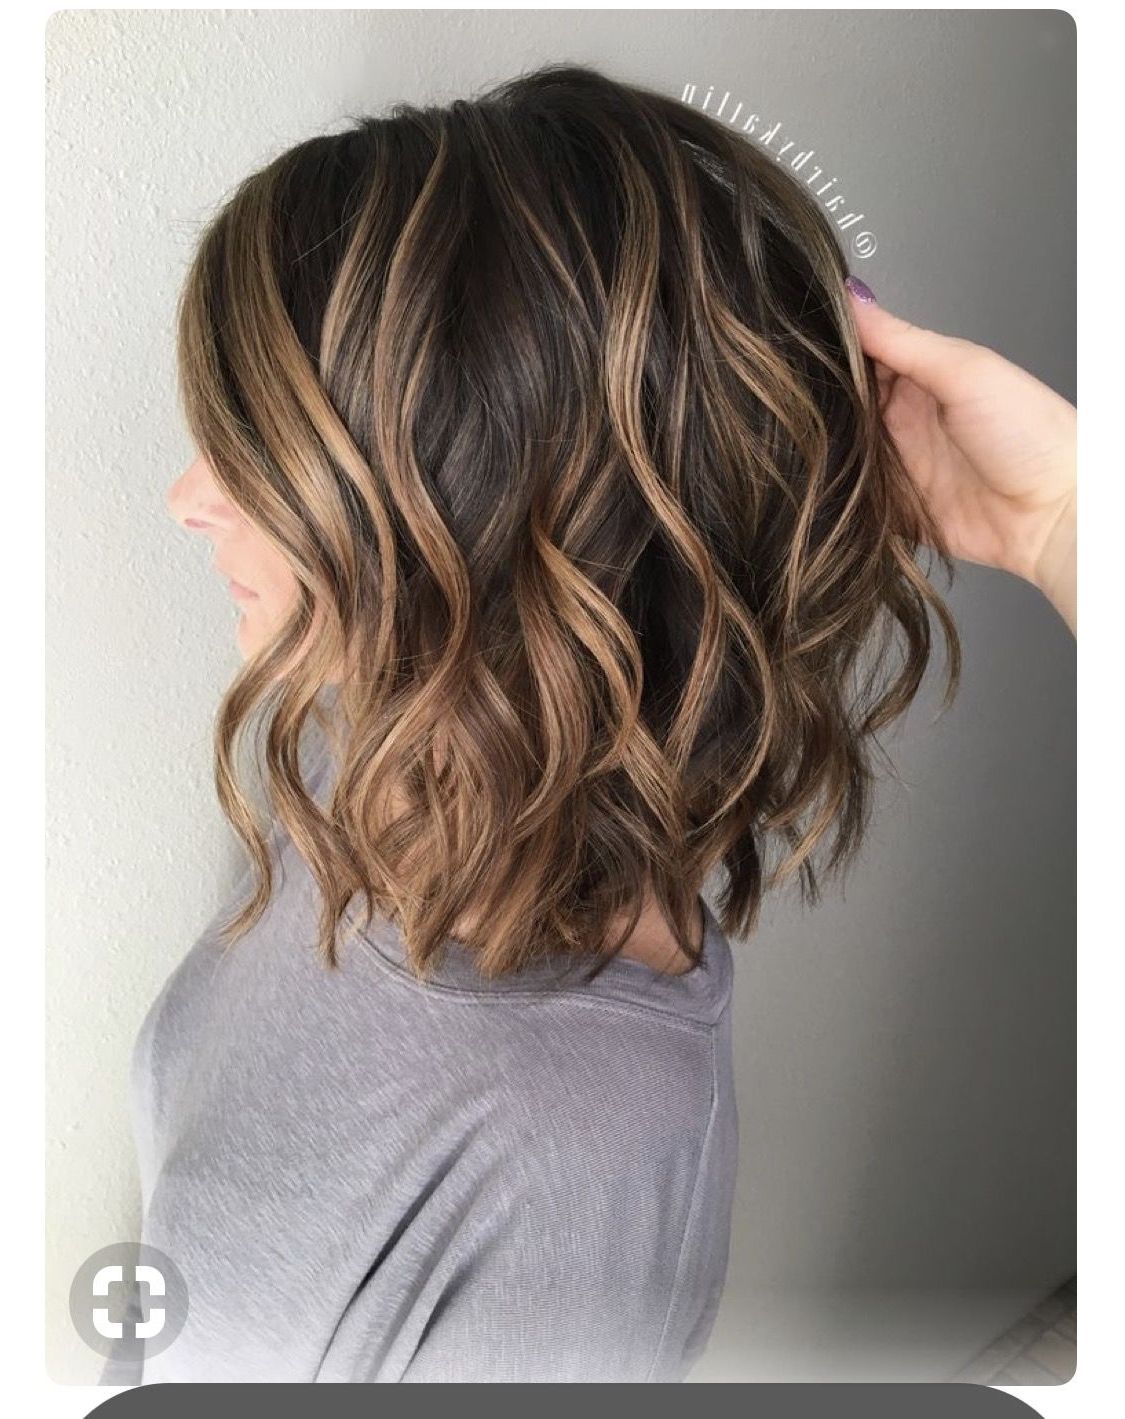 Pinsuzie Huffman On Hair | Pinterest | Hair Style, Hair Coloring Throughout Most Recent Shaggy Pixie Haircuts With Balayage Highlights (View 4 of 15)